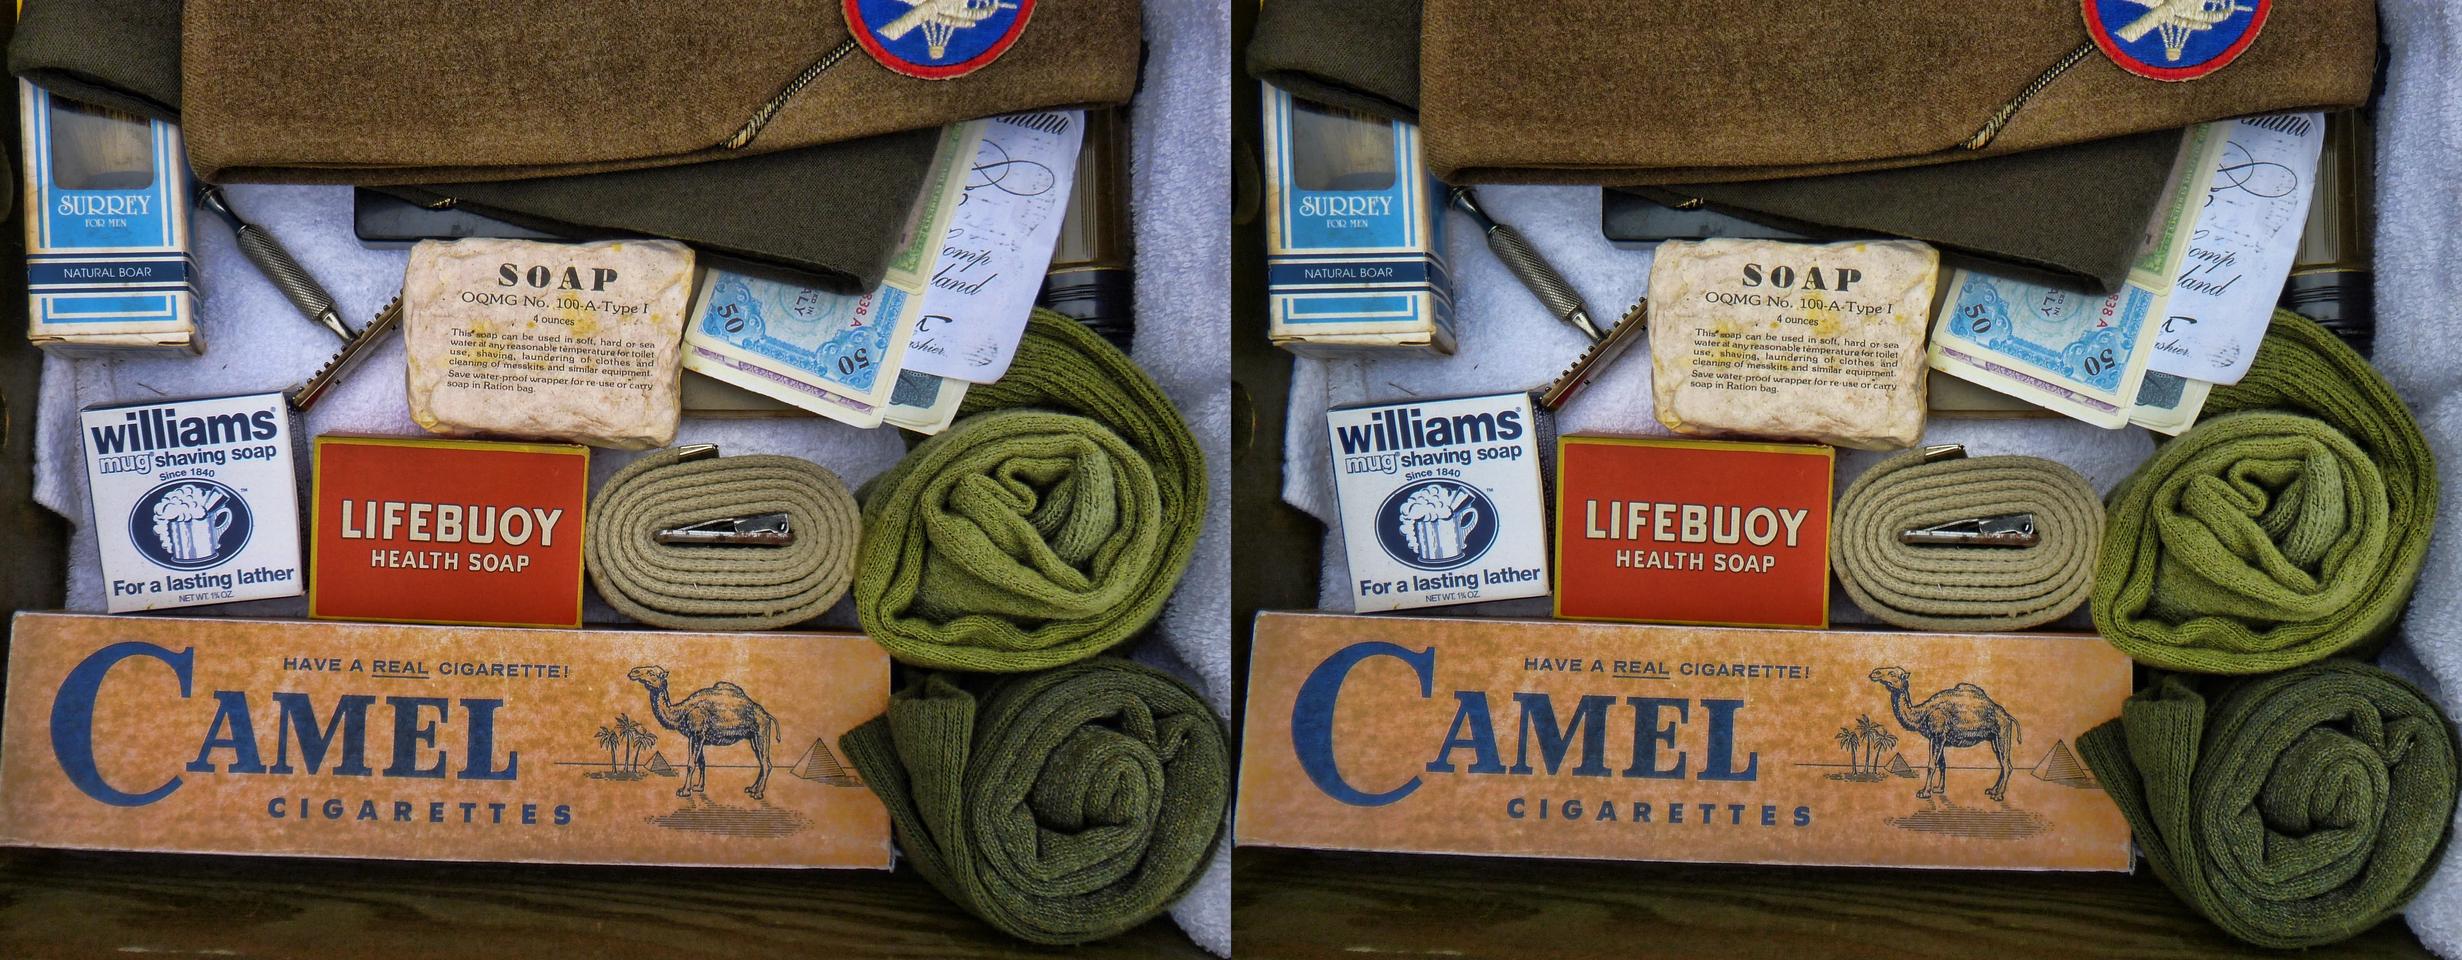 Collings Foundation WORLD WAR II Re-enactment Personal Supplies w Cigarettes and Soap